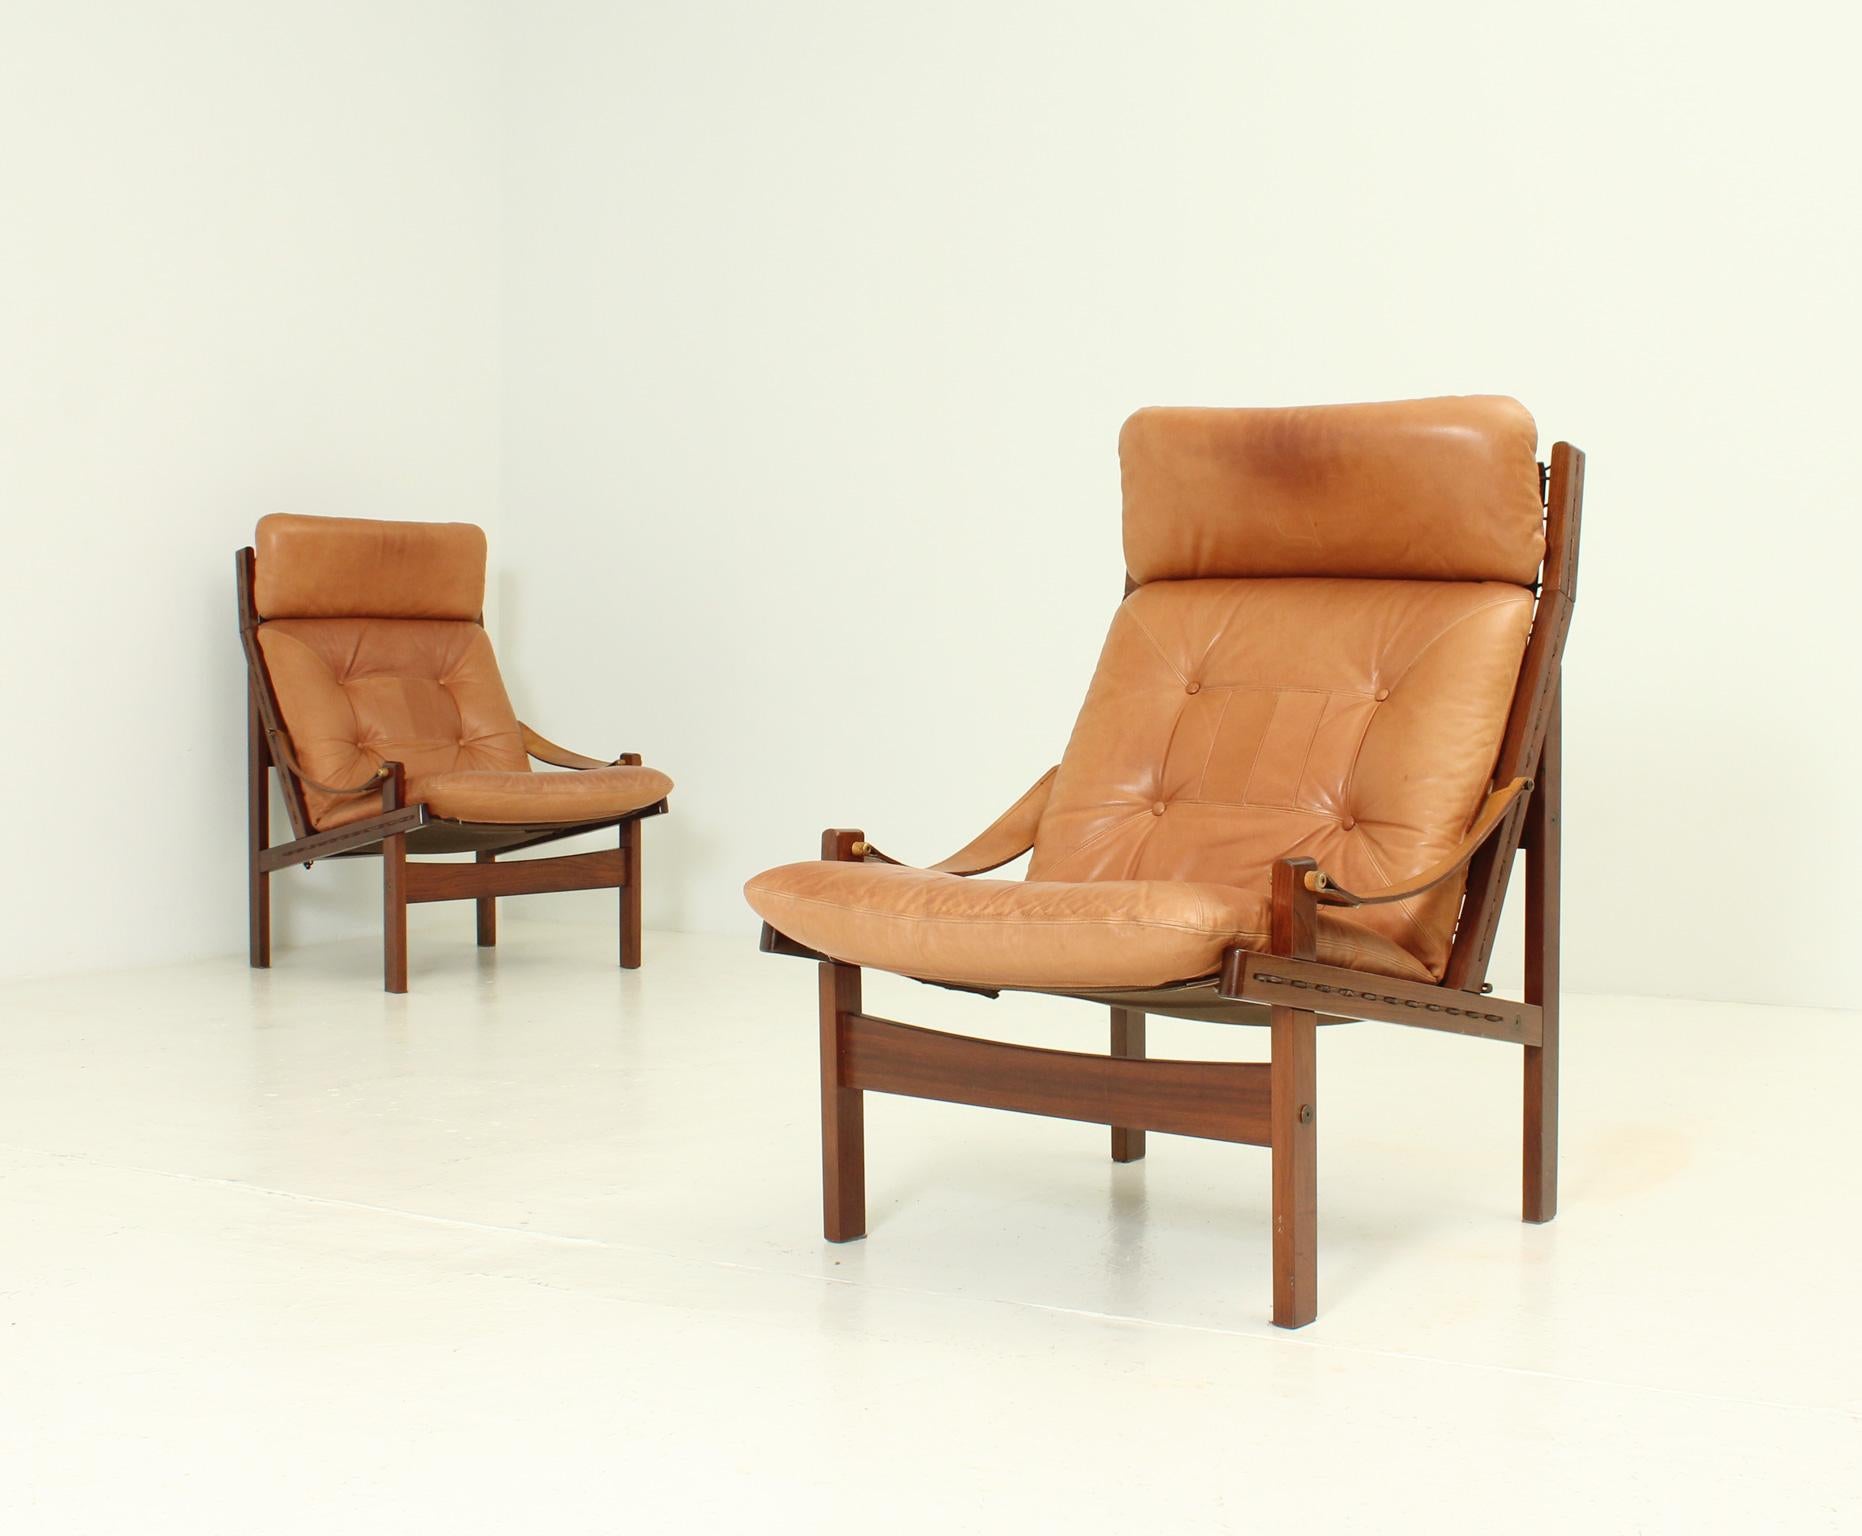 Pair of Hunter lounge chairs designed in 1960's by Torbjørn Afdal for Bruksbo, Norway. Tropical wood frame with canvas seat and original leather cushions and strabs.